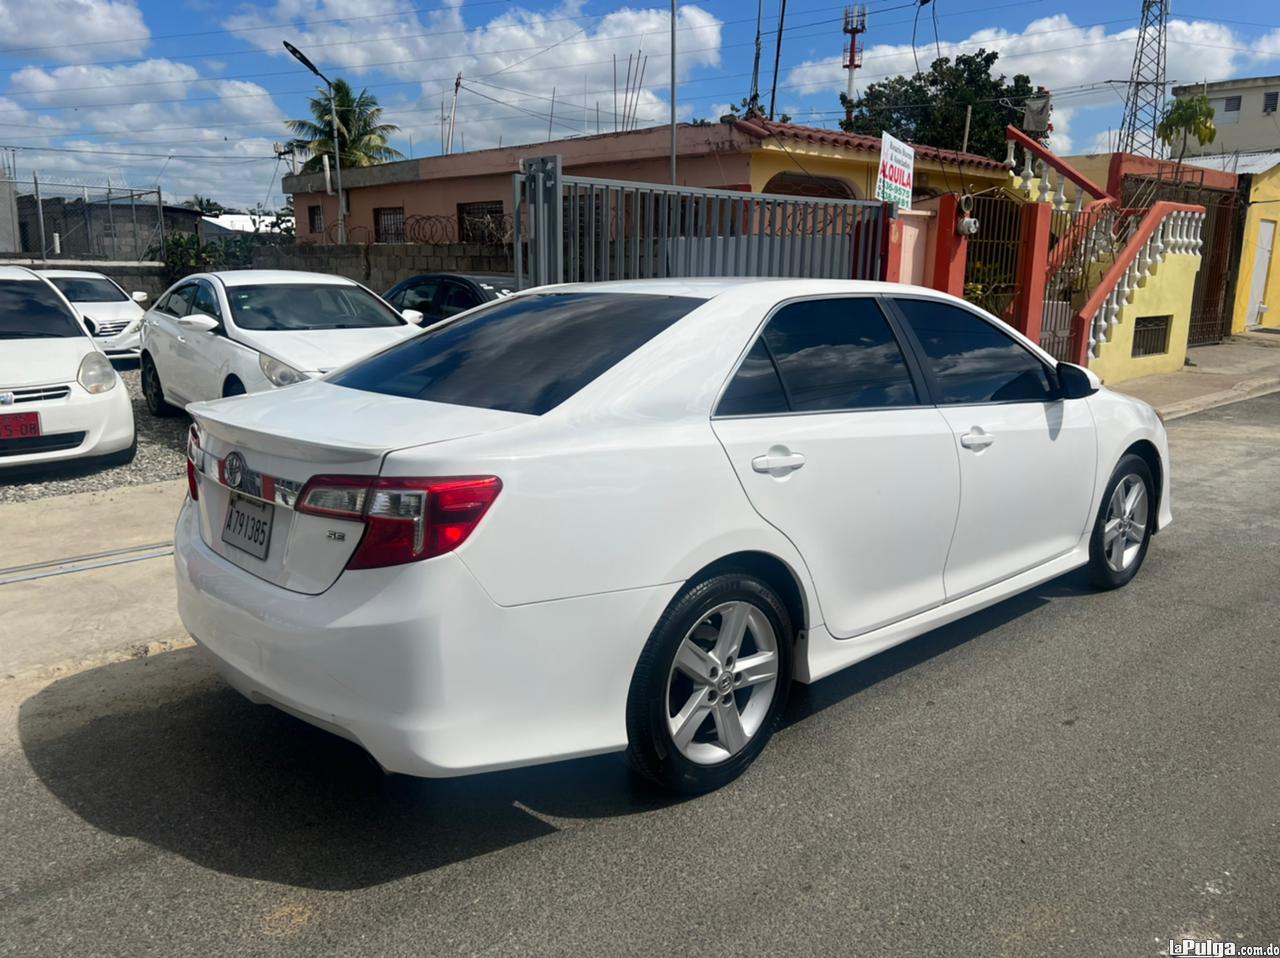 Toyota Camry Se  2014 inicial 269 mil Foto 7138856-4.jpg